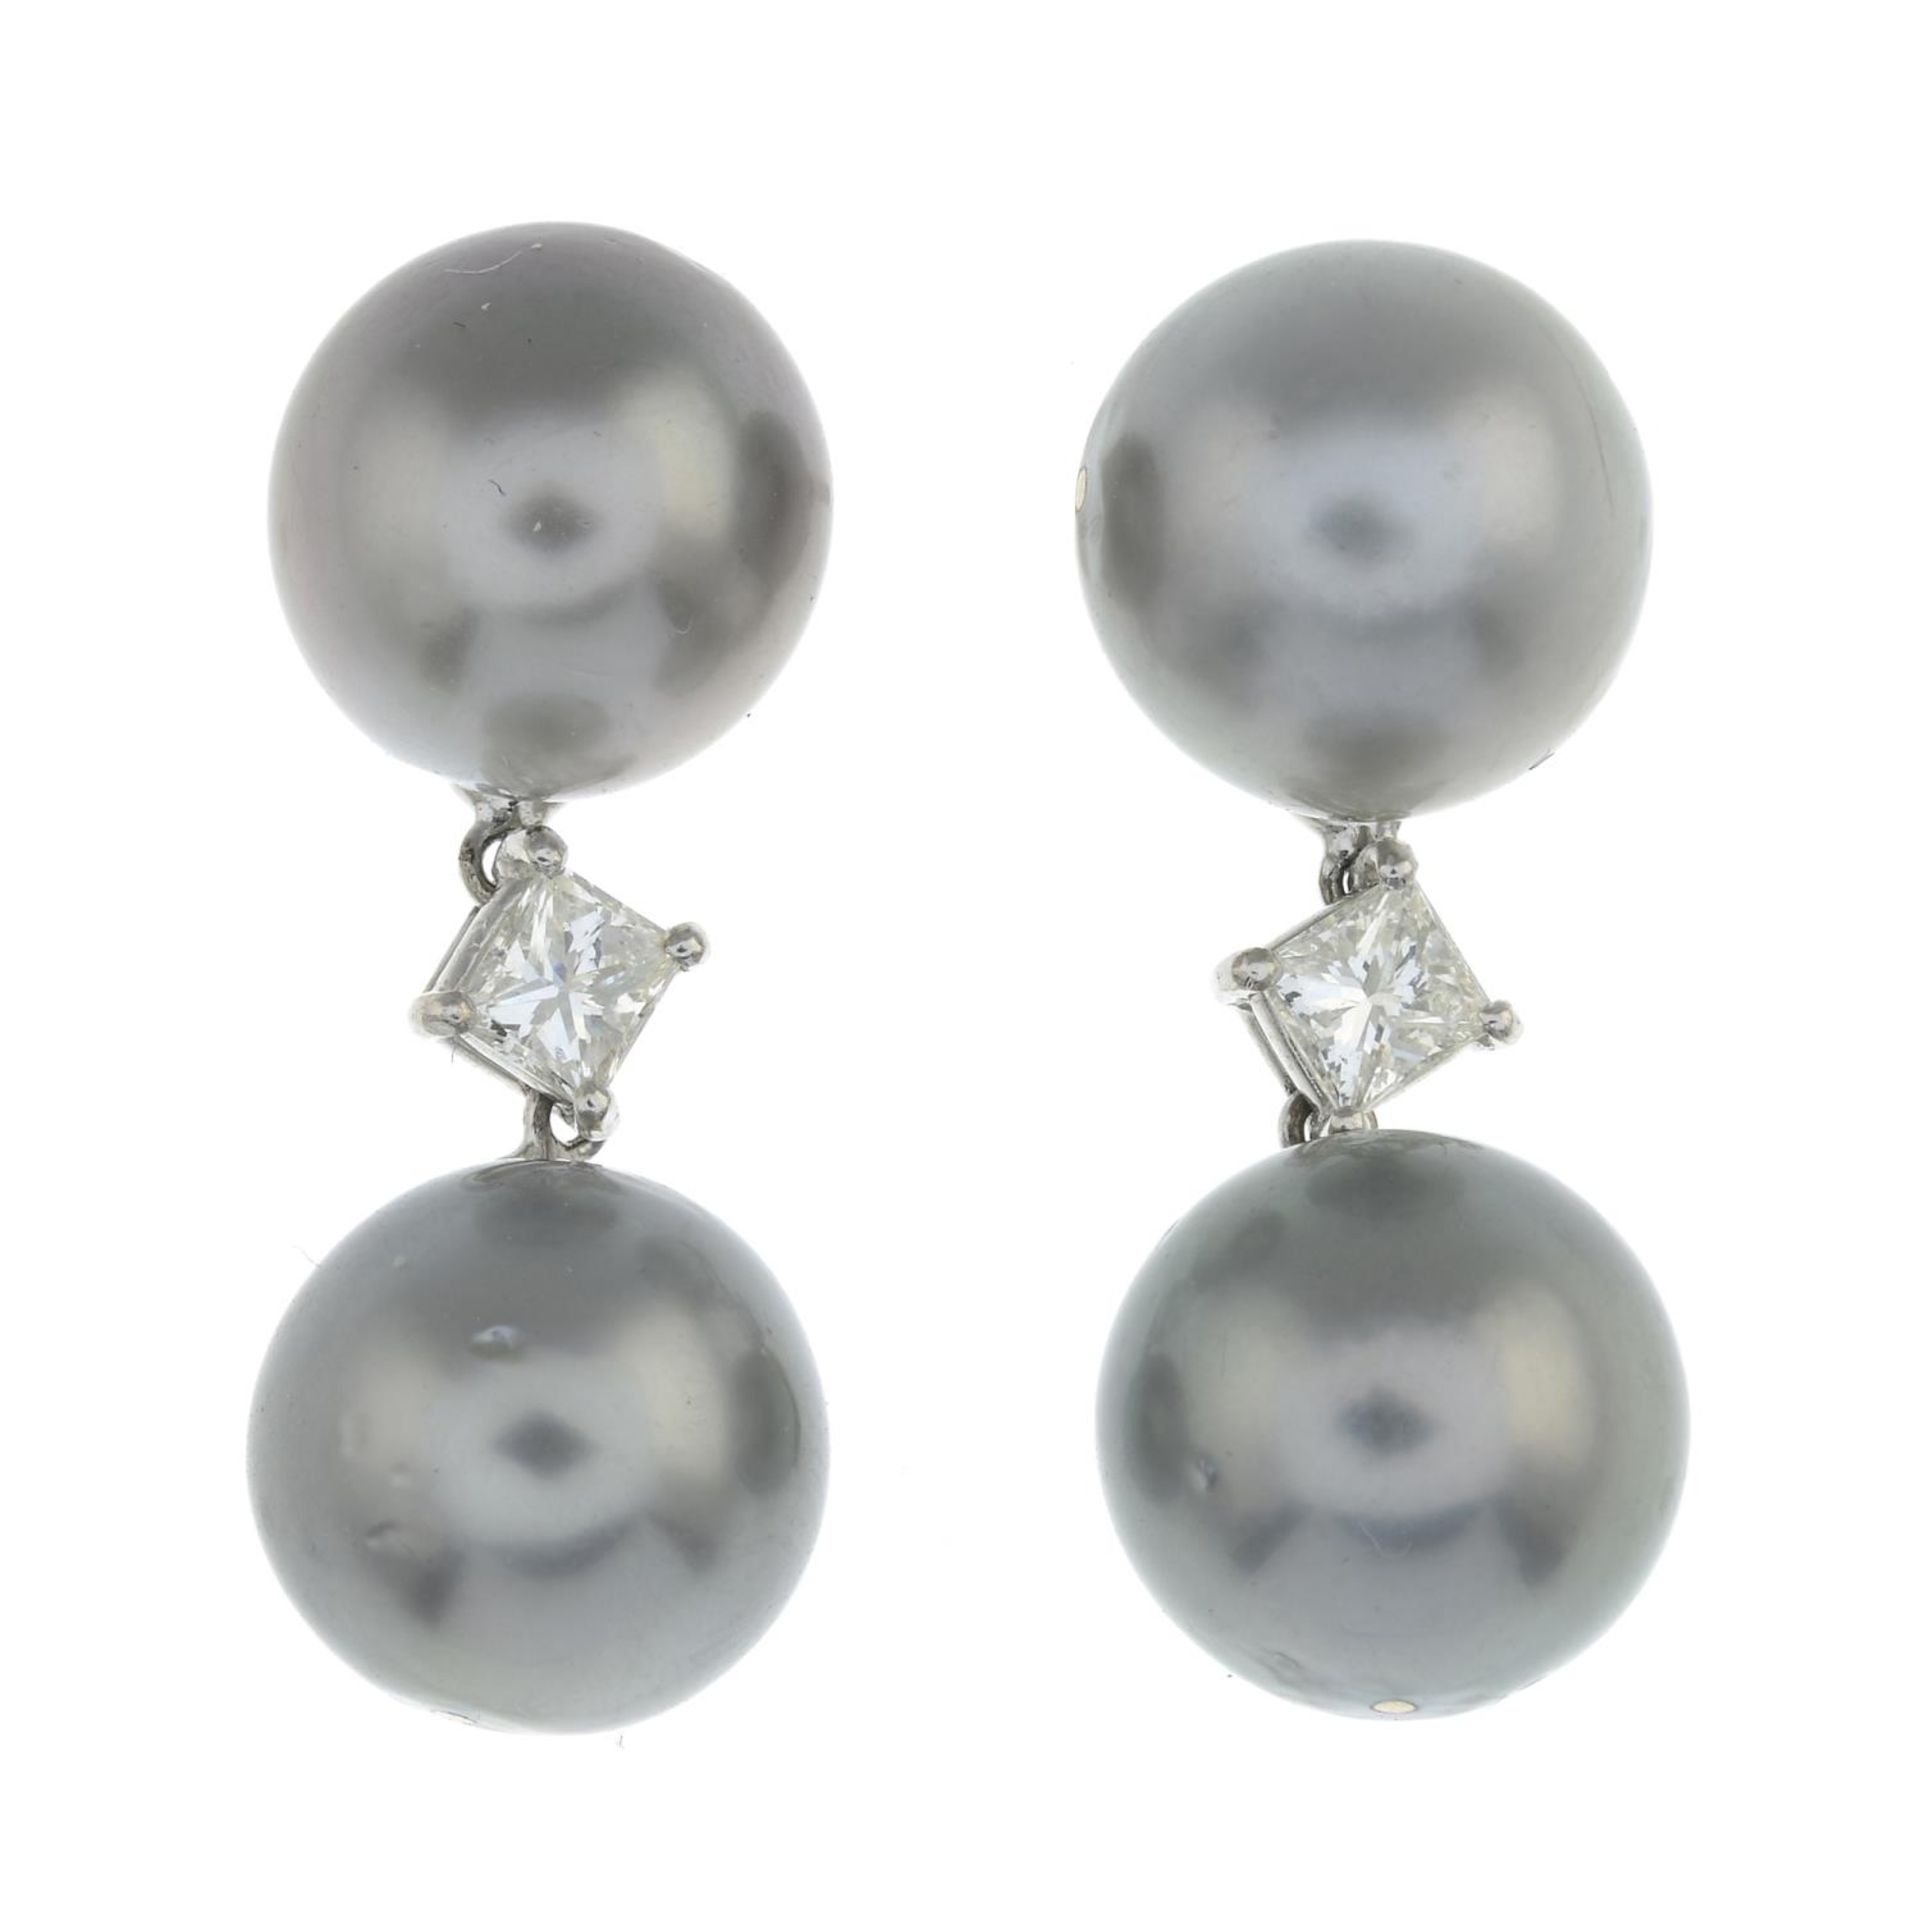 A pair of cultured pearl and square-cut diamond drop earrings.Approximate dimensions of one